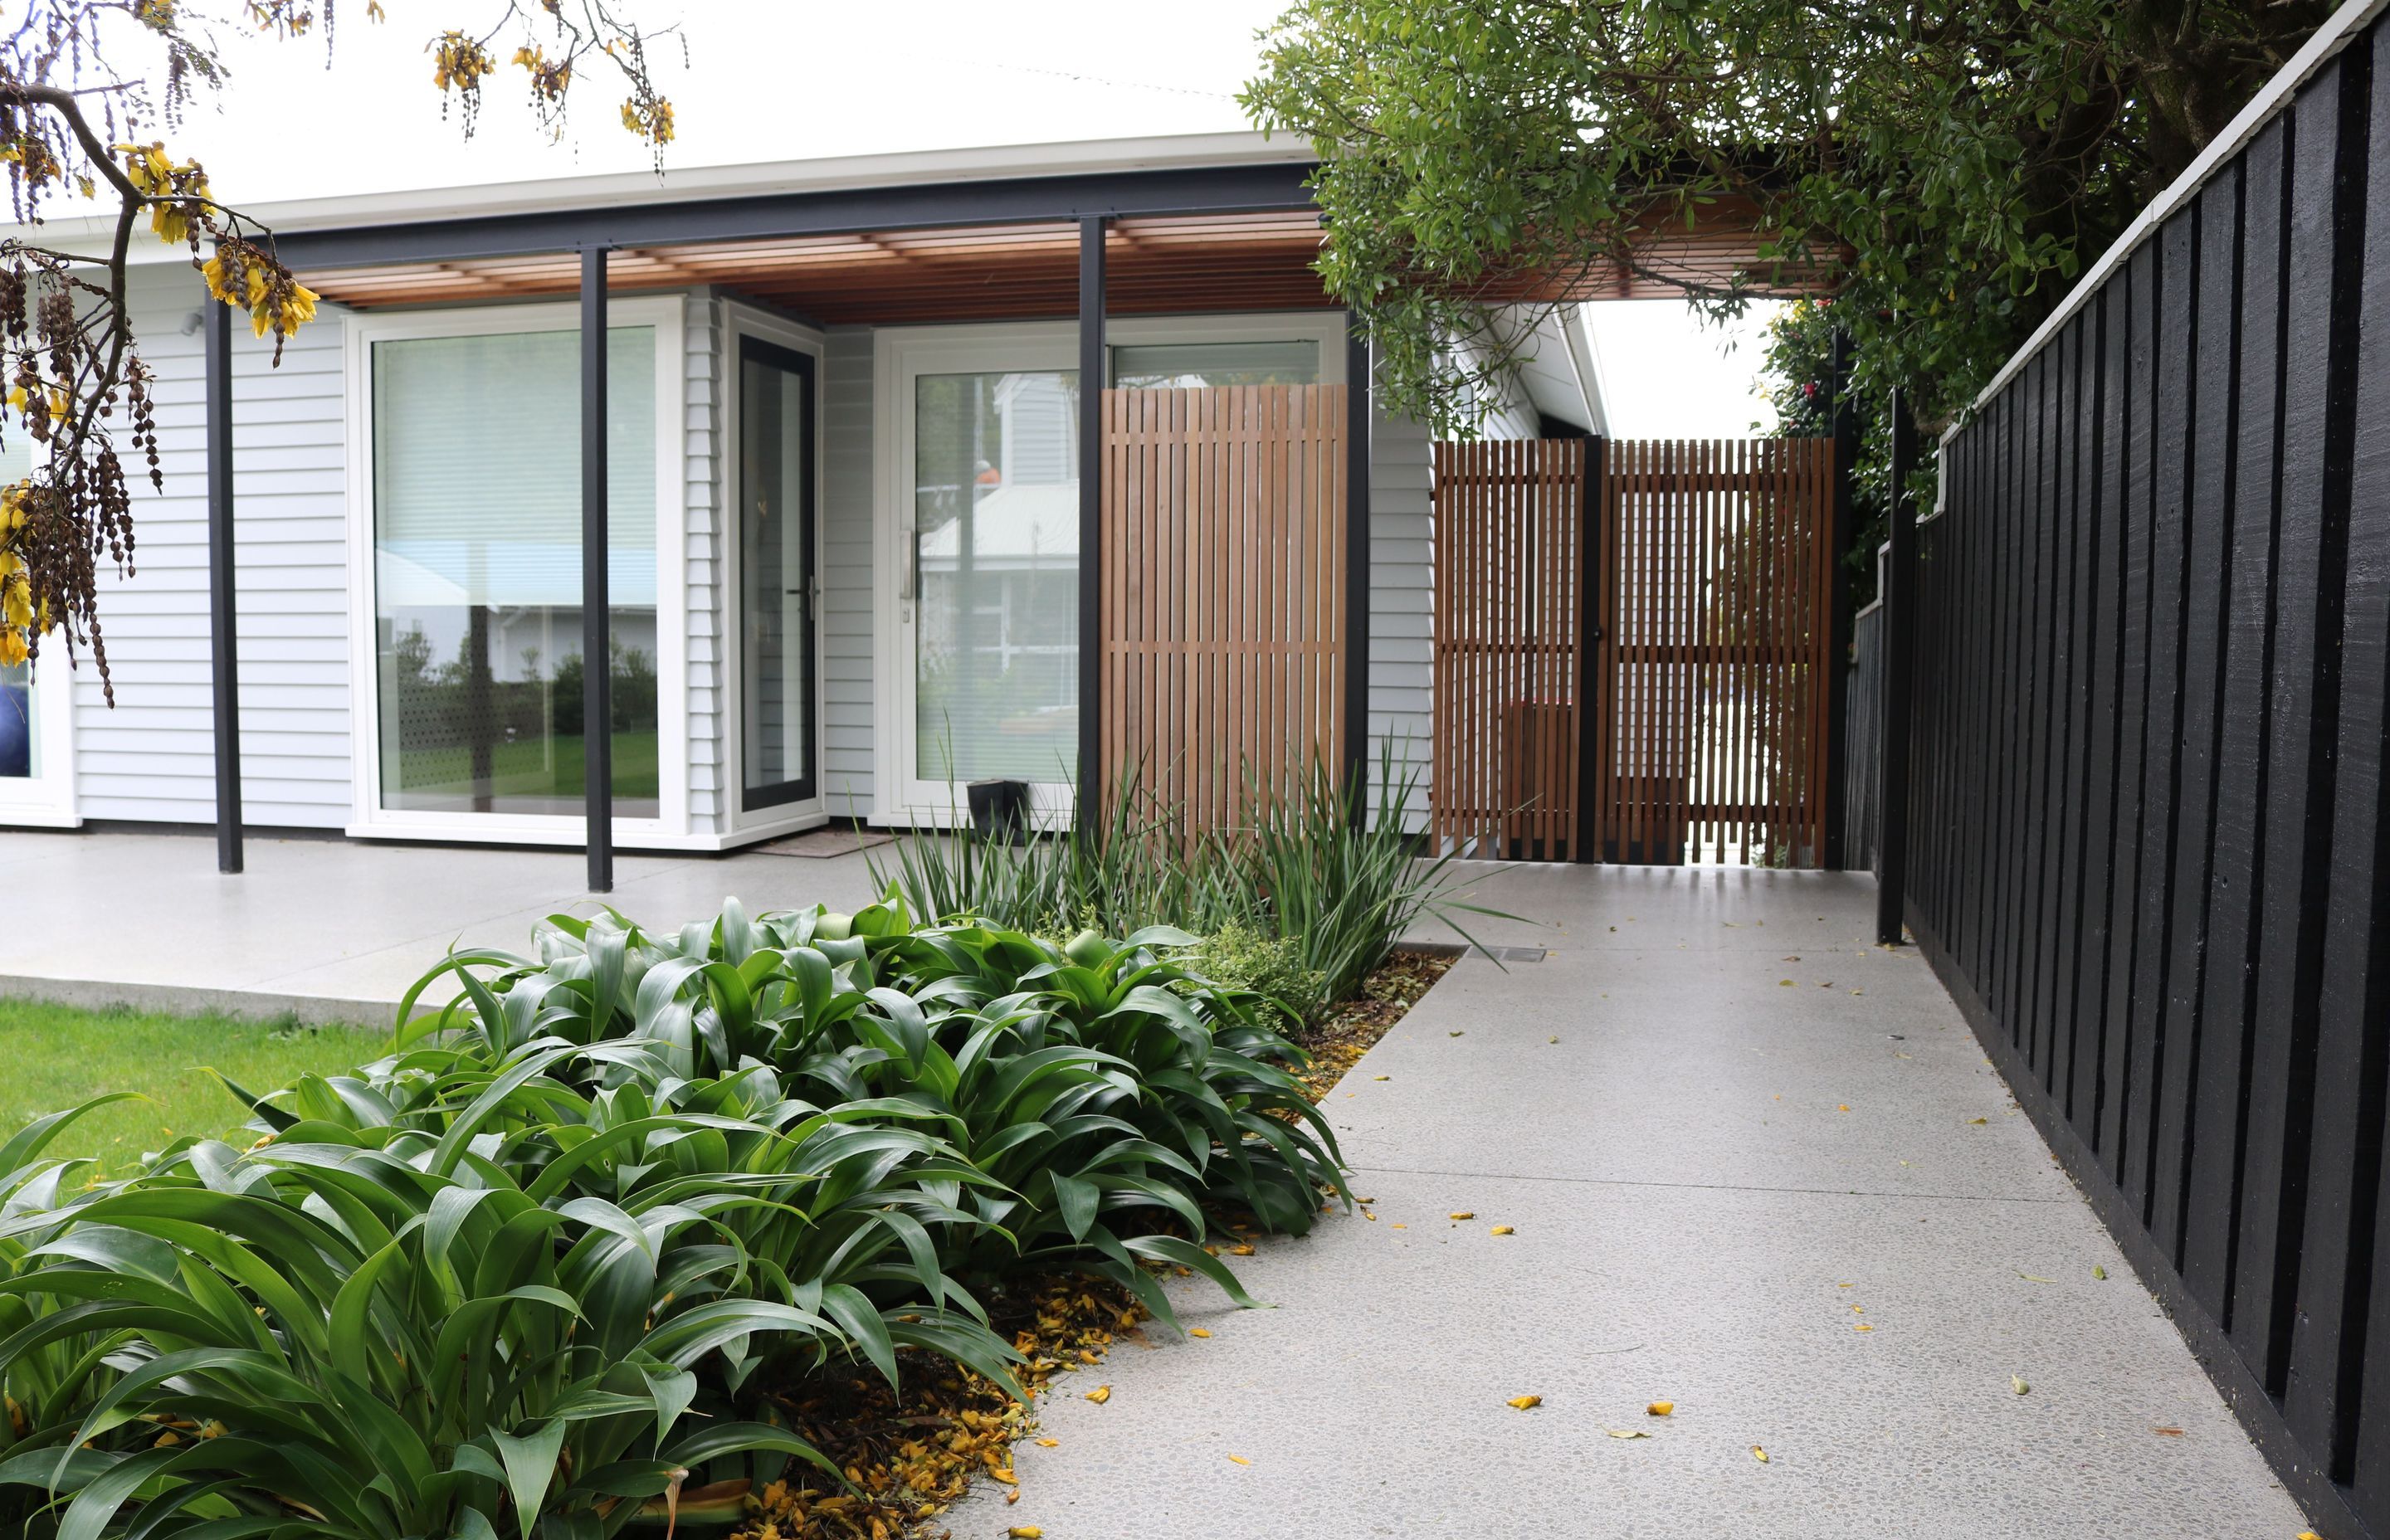 House renovation &amp; associated landscape architecture Tse : Wallace Architects. Planting design by HEDGE, Rodeneath.